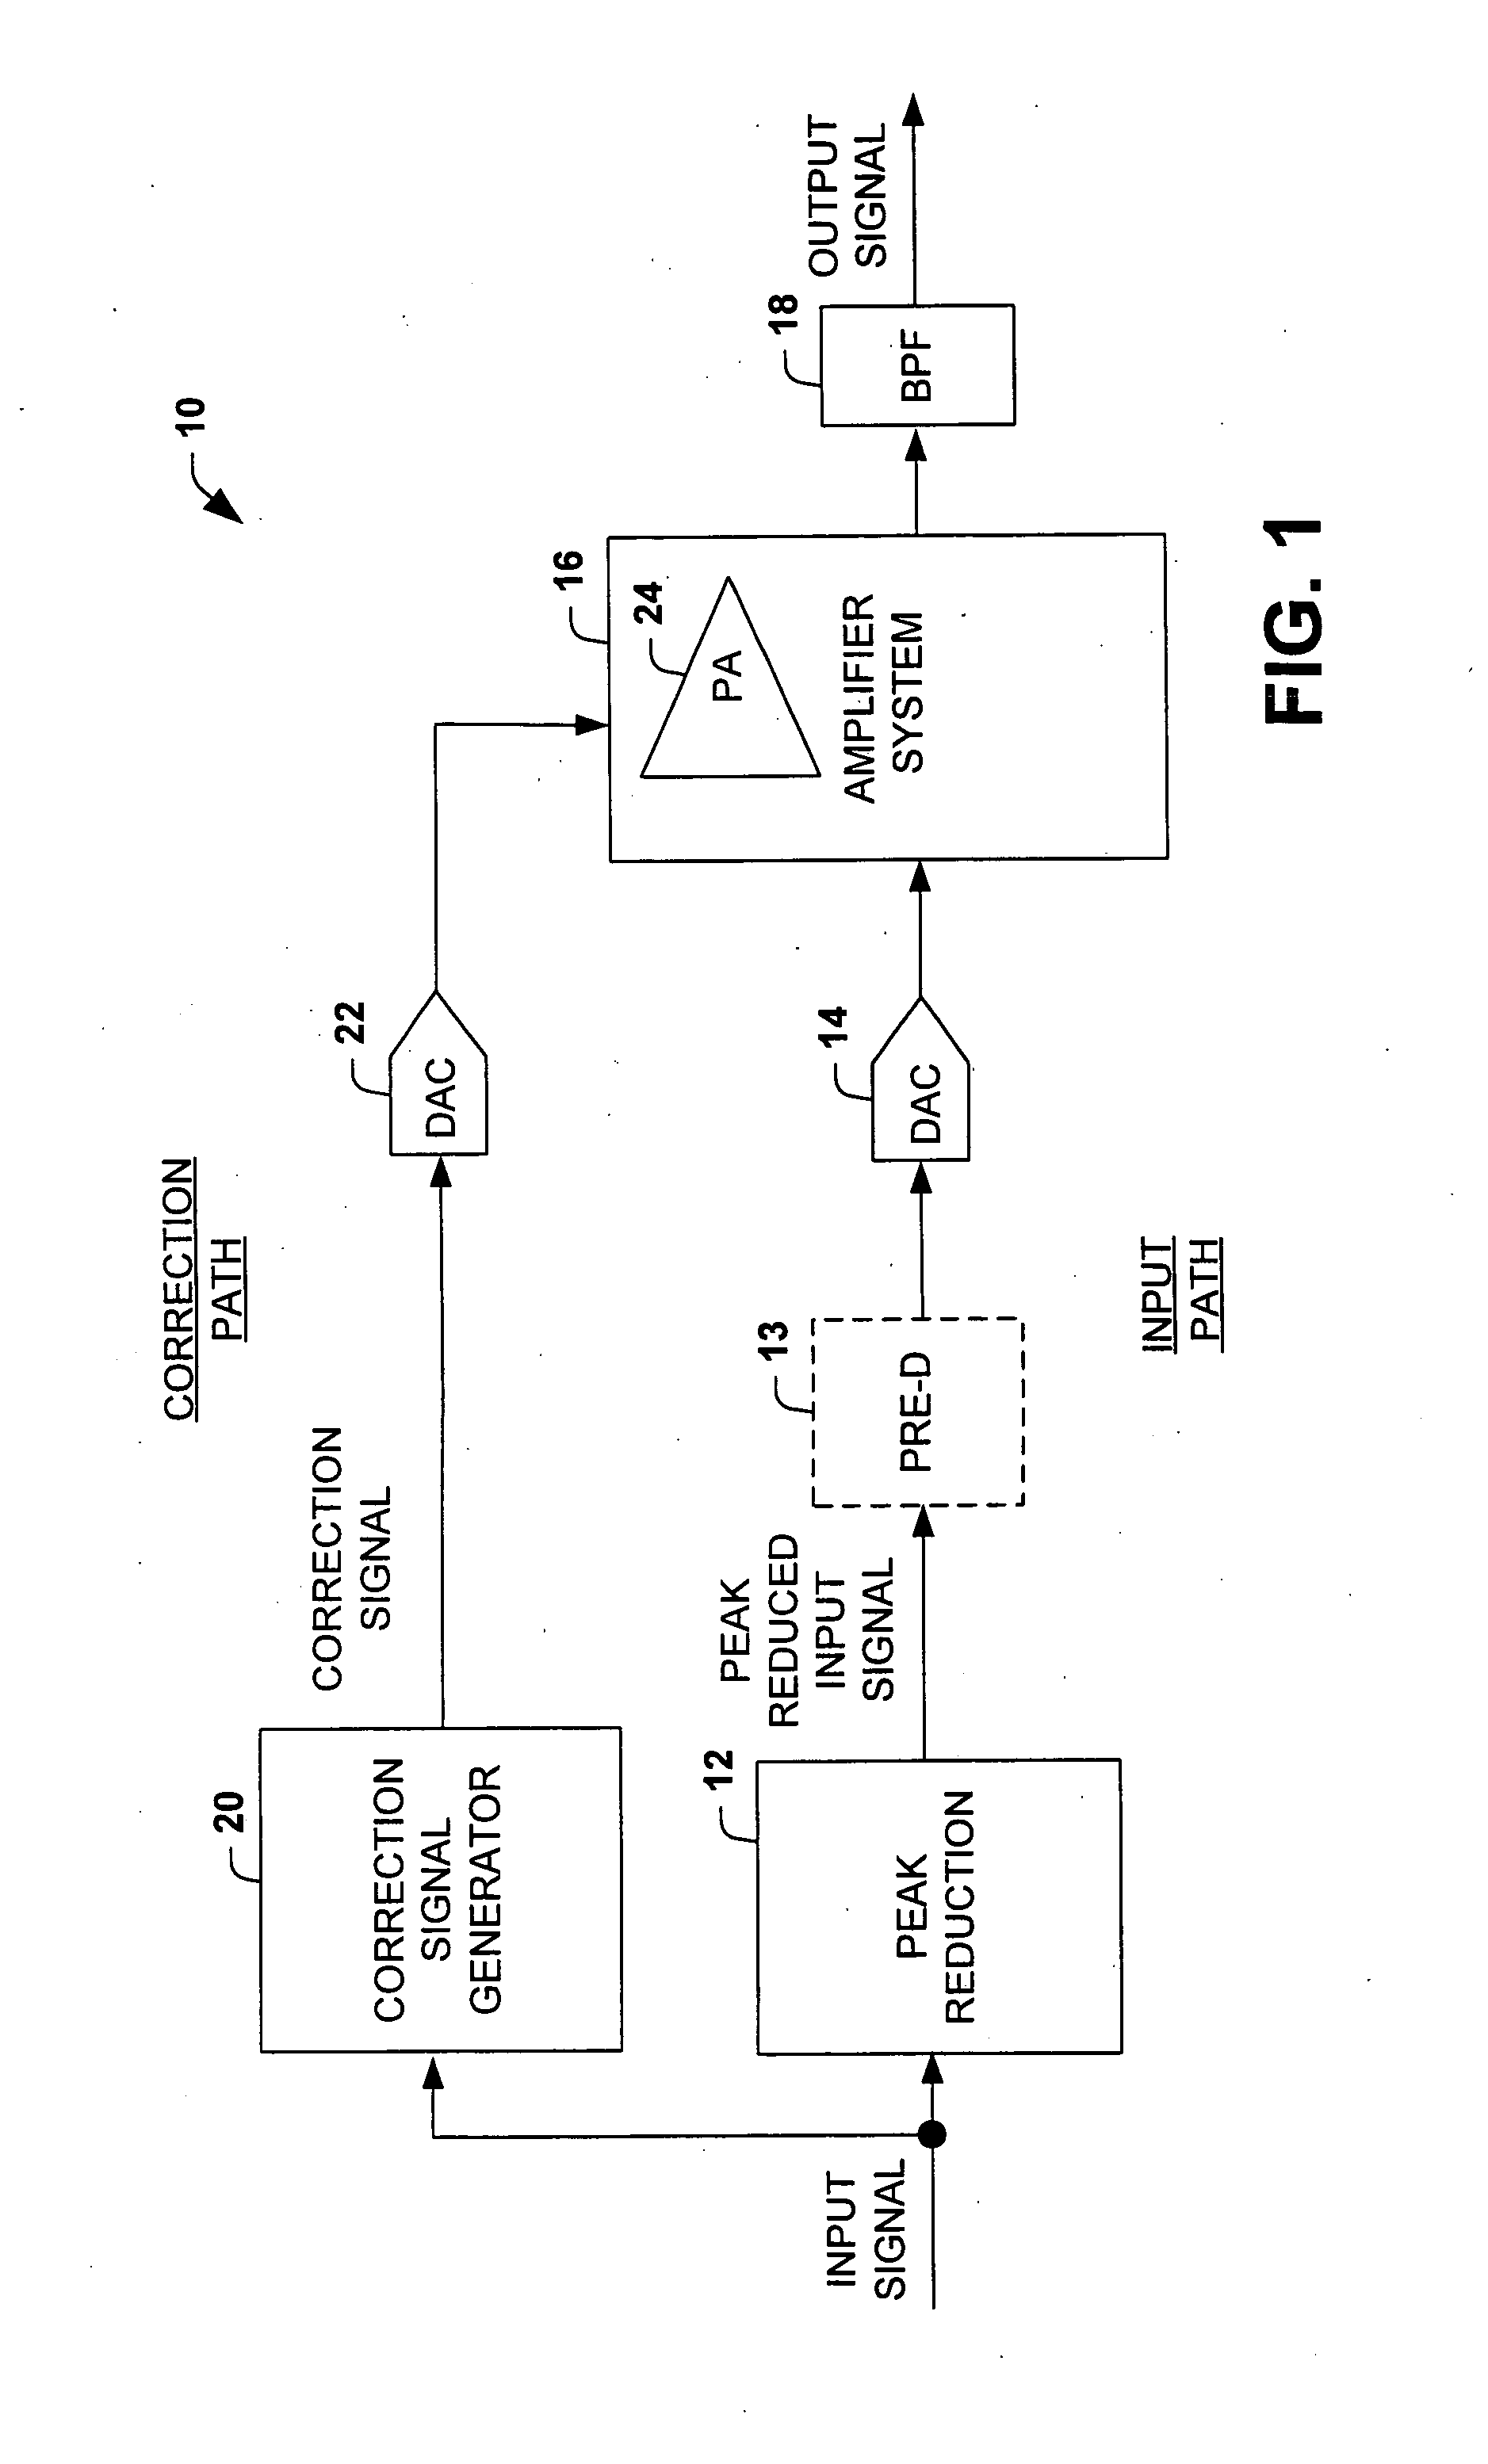 System and method for reducing dynamic range and improving linearity in an amplication system